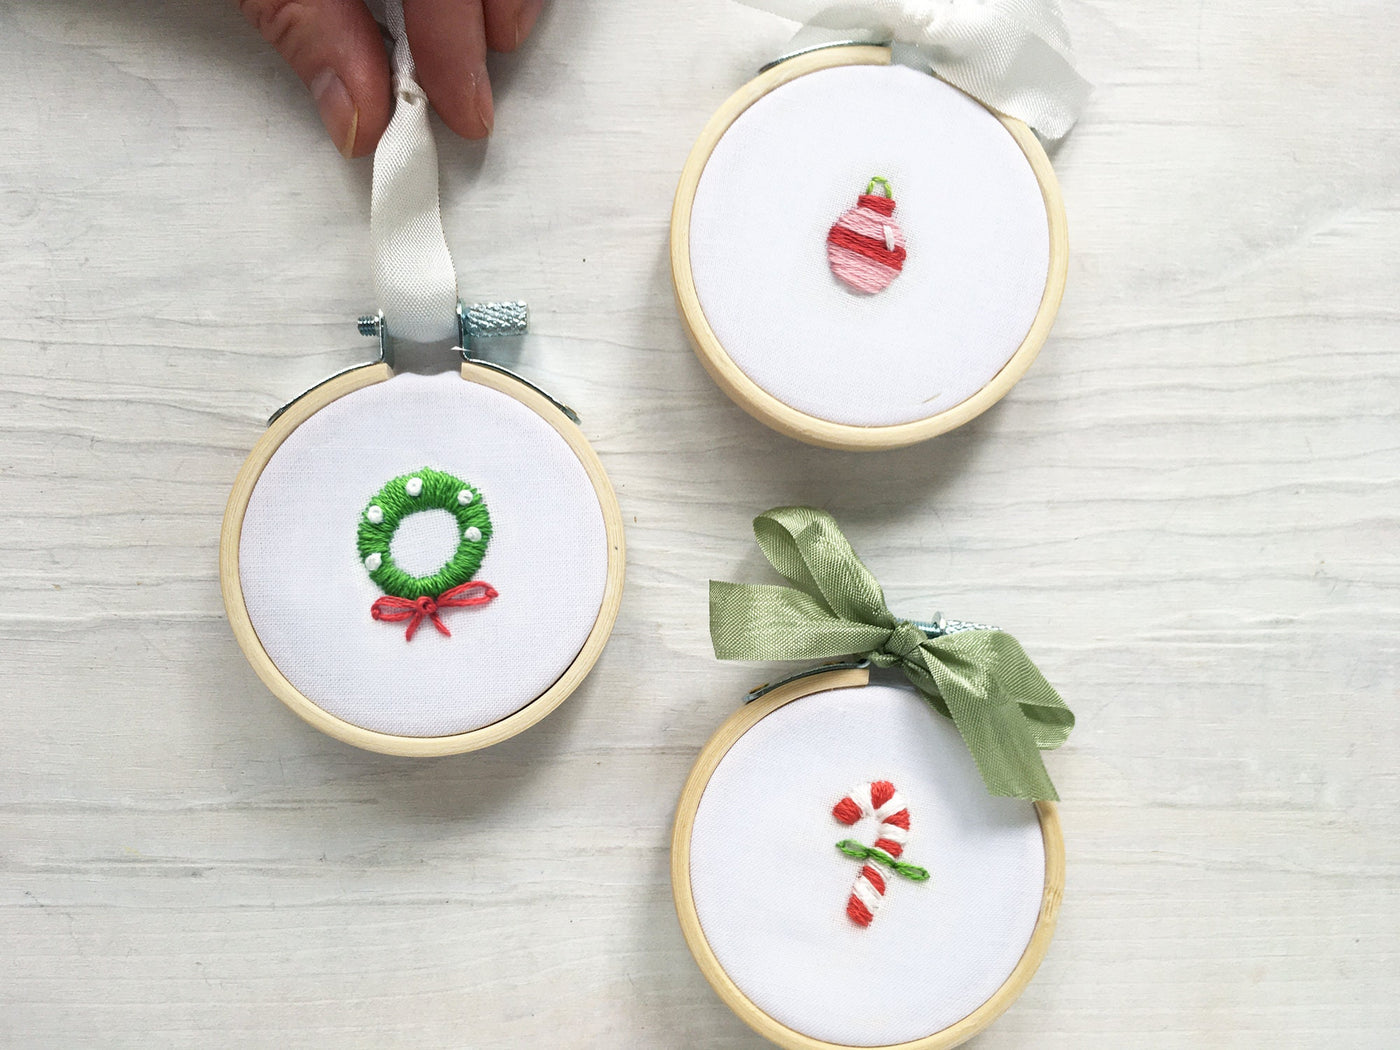 Tiny Christmas Motifs Hand Embroidery pattern download, mini holiday ornaments